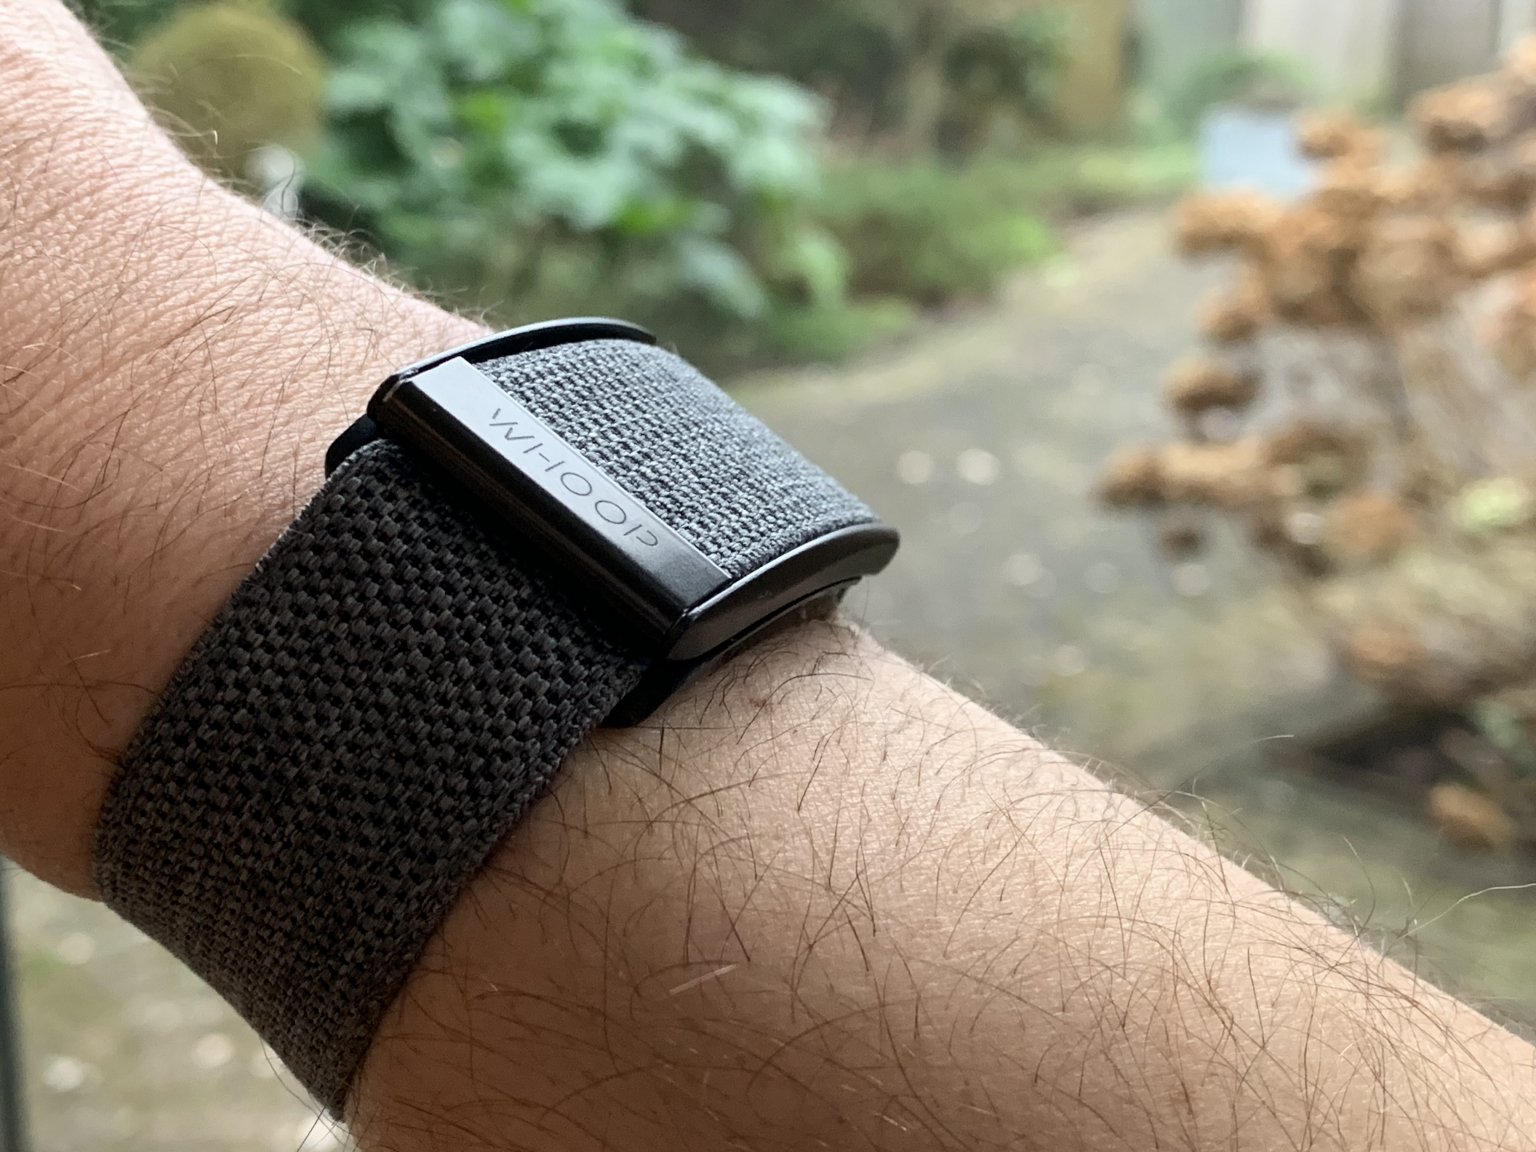 Whoop strap review: 24/7 wearable sensor - Beyond fitness tracking and ...